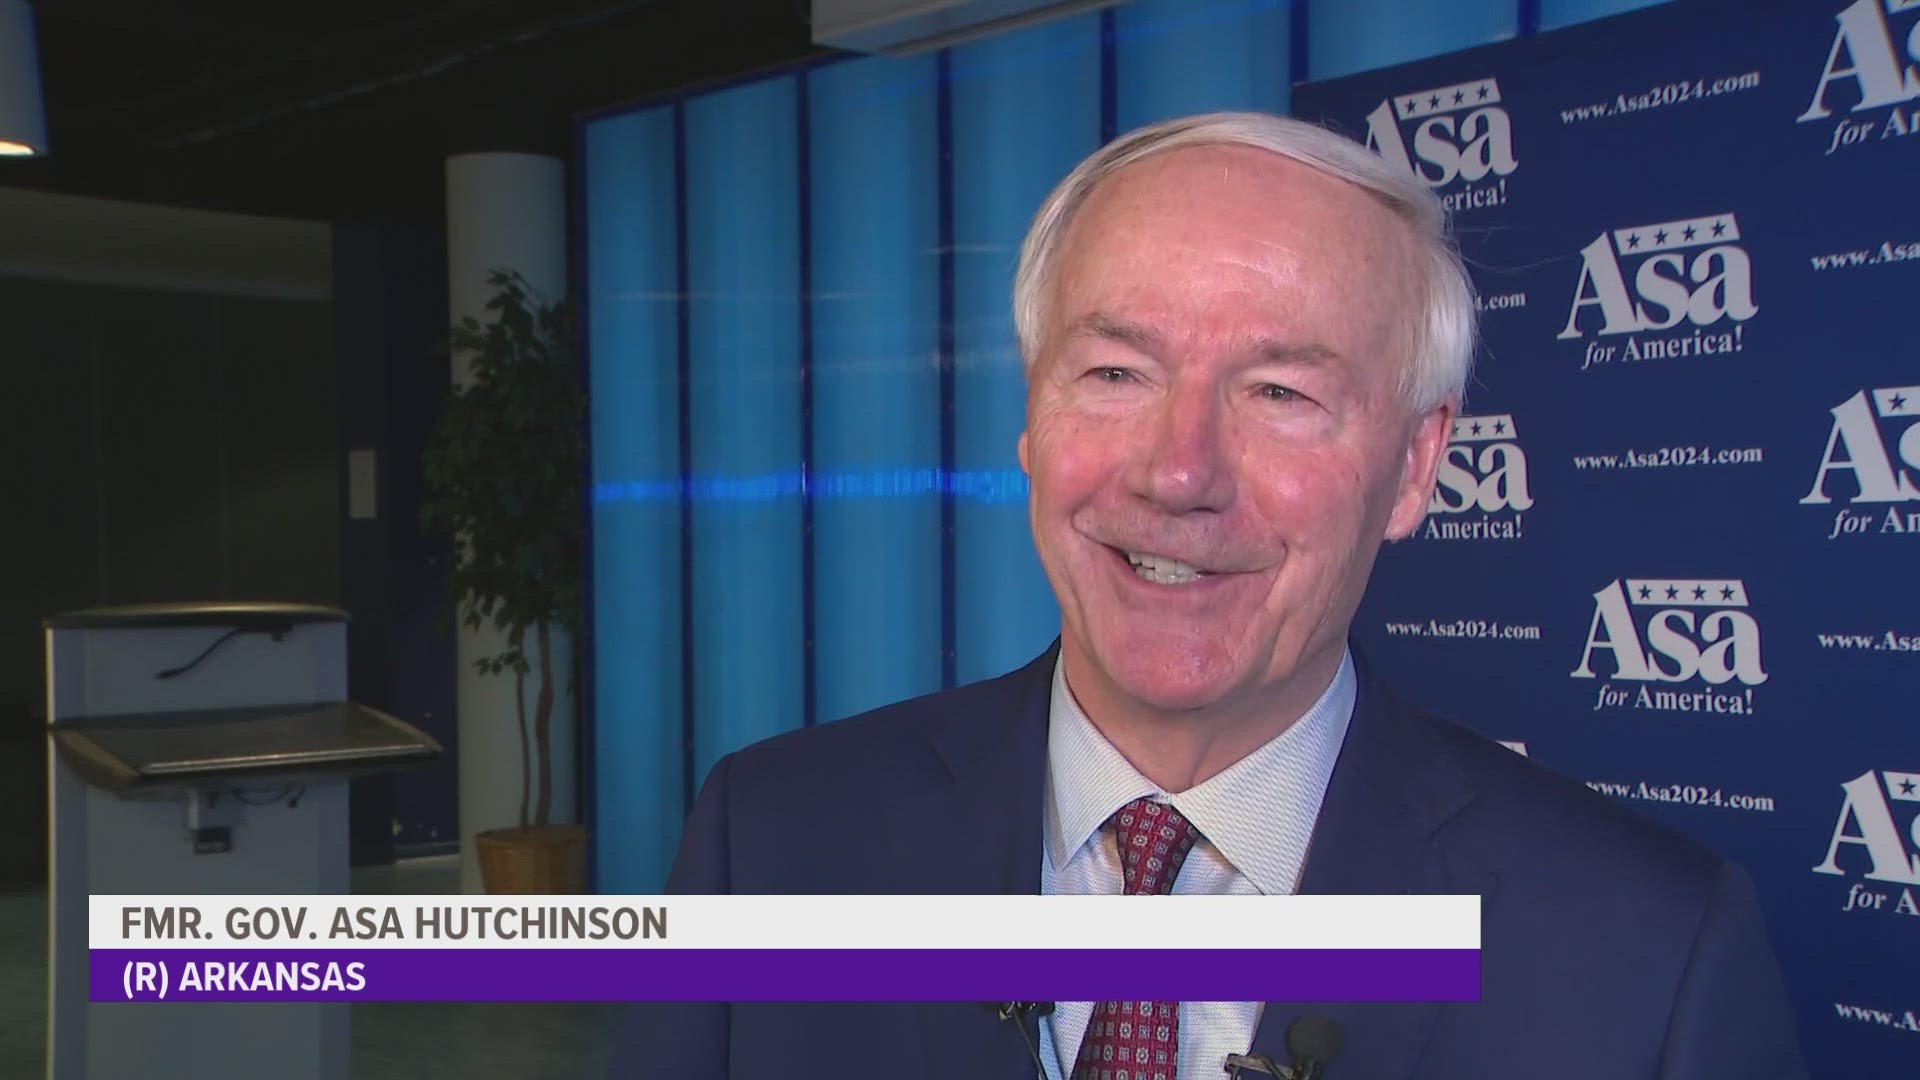 Hutchinson didn't qualify for the last two debates, but hasn't shared any intentions of ending his campaign soon.